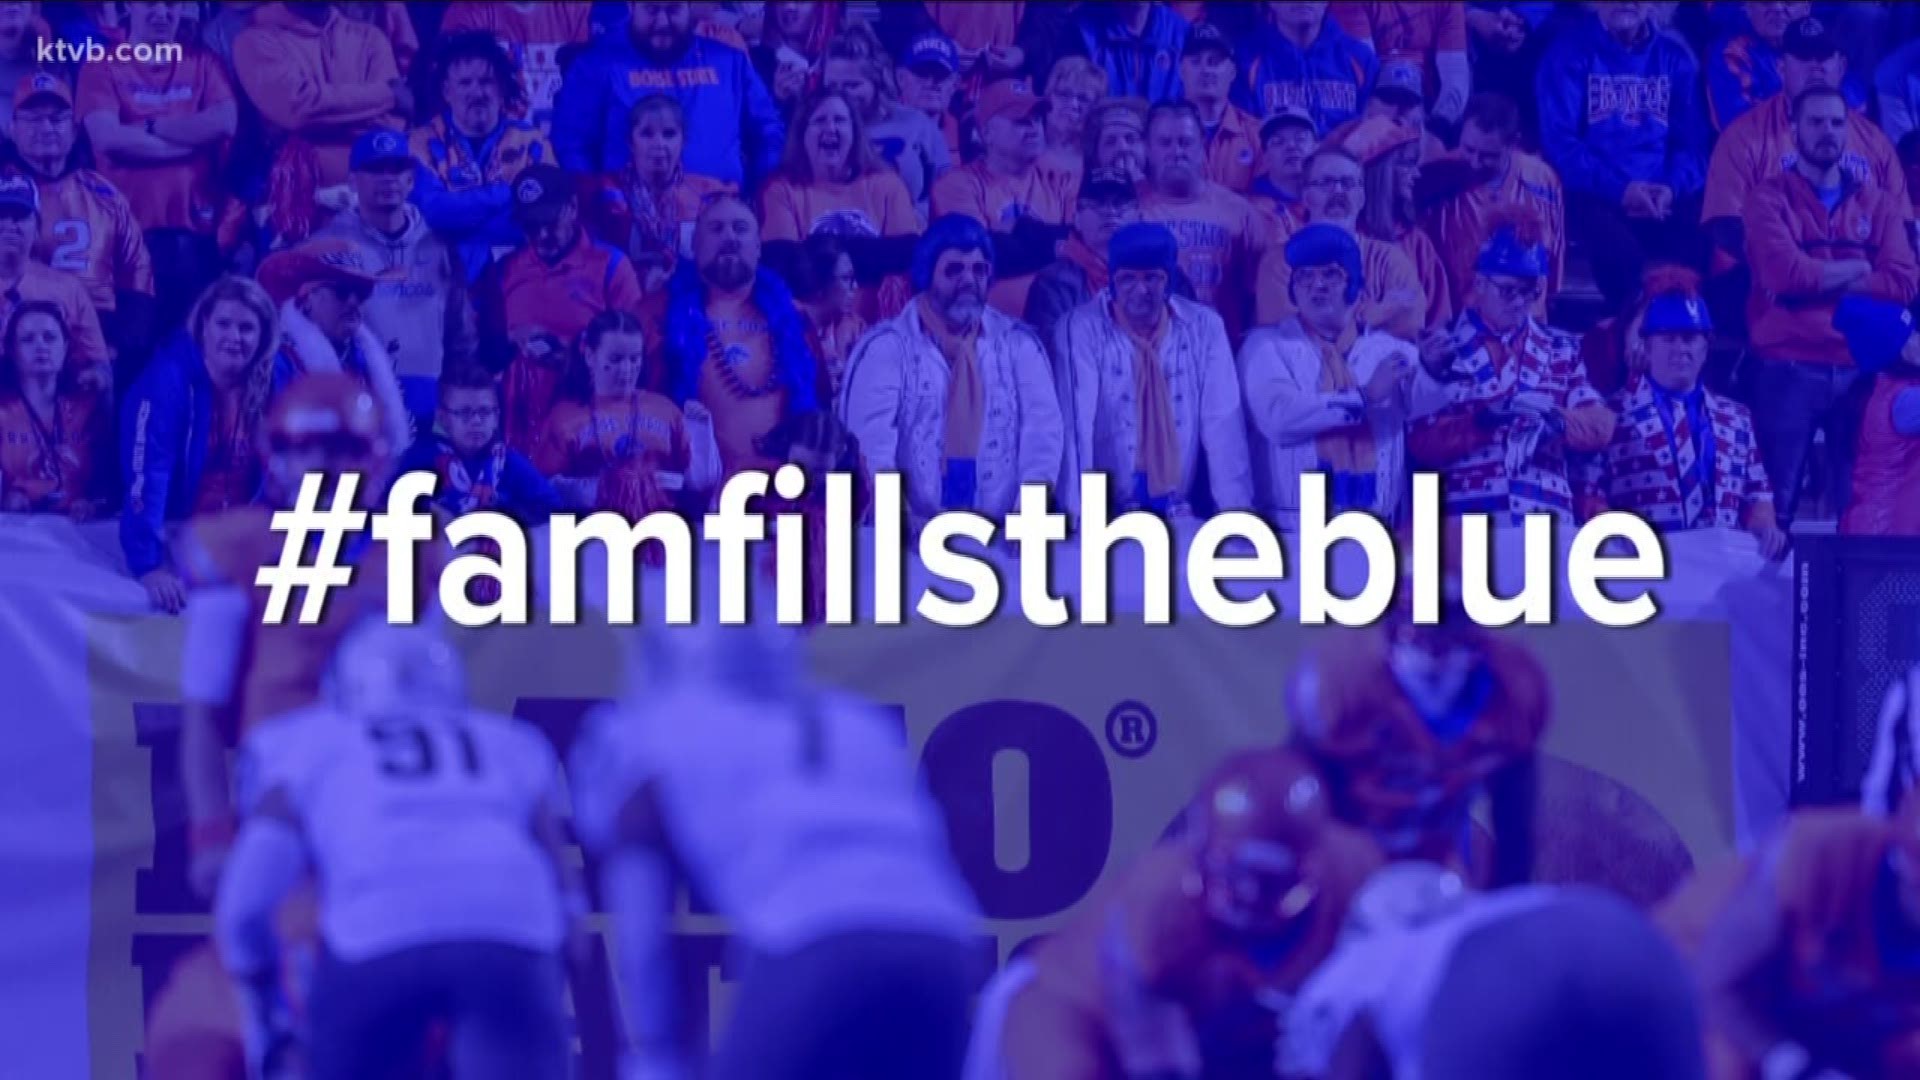 One Boise State fan blog is launching a campaign to help those who can’t afford tickets to have a chance to see the Mountain West Championship game at the Blue.